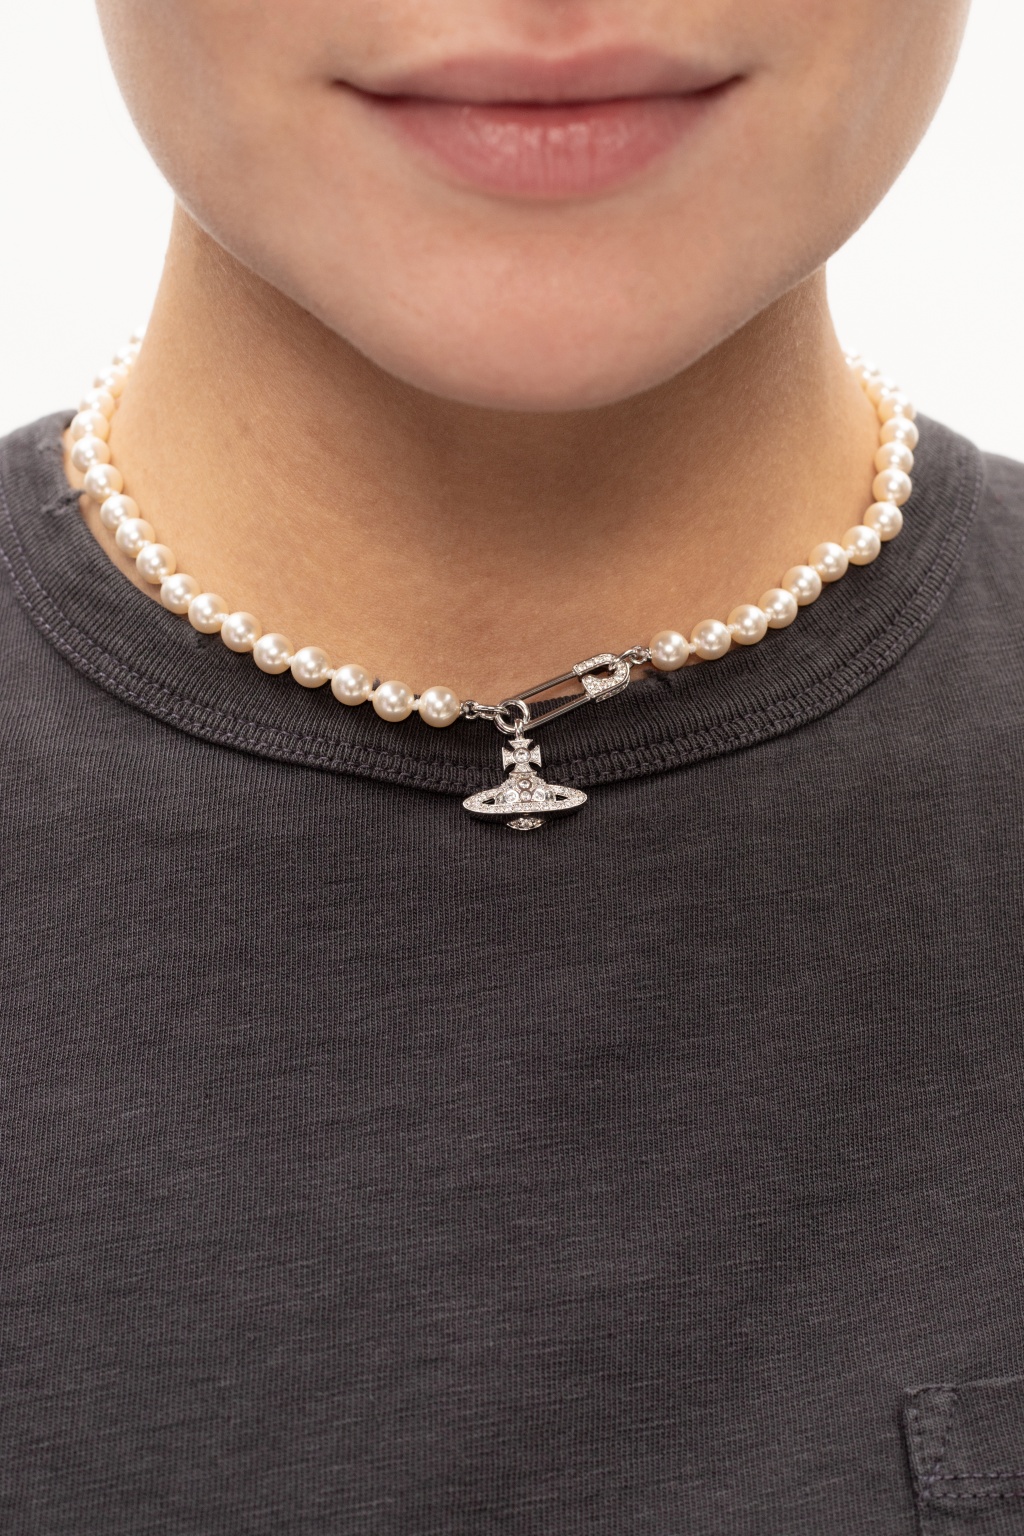 A guest wears pearls pendant necklaces from Vivienne Westwood, a